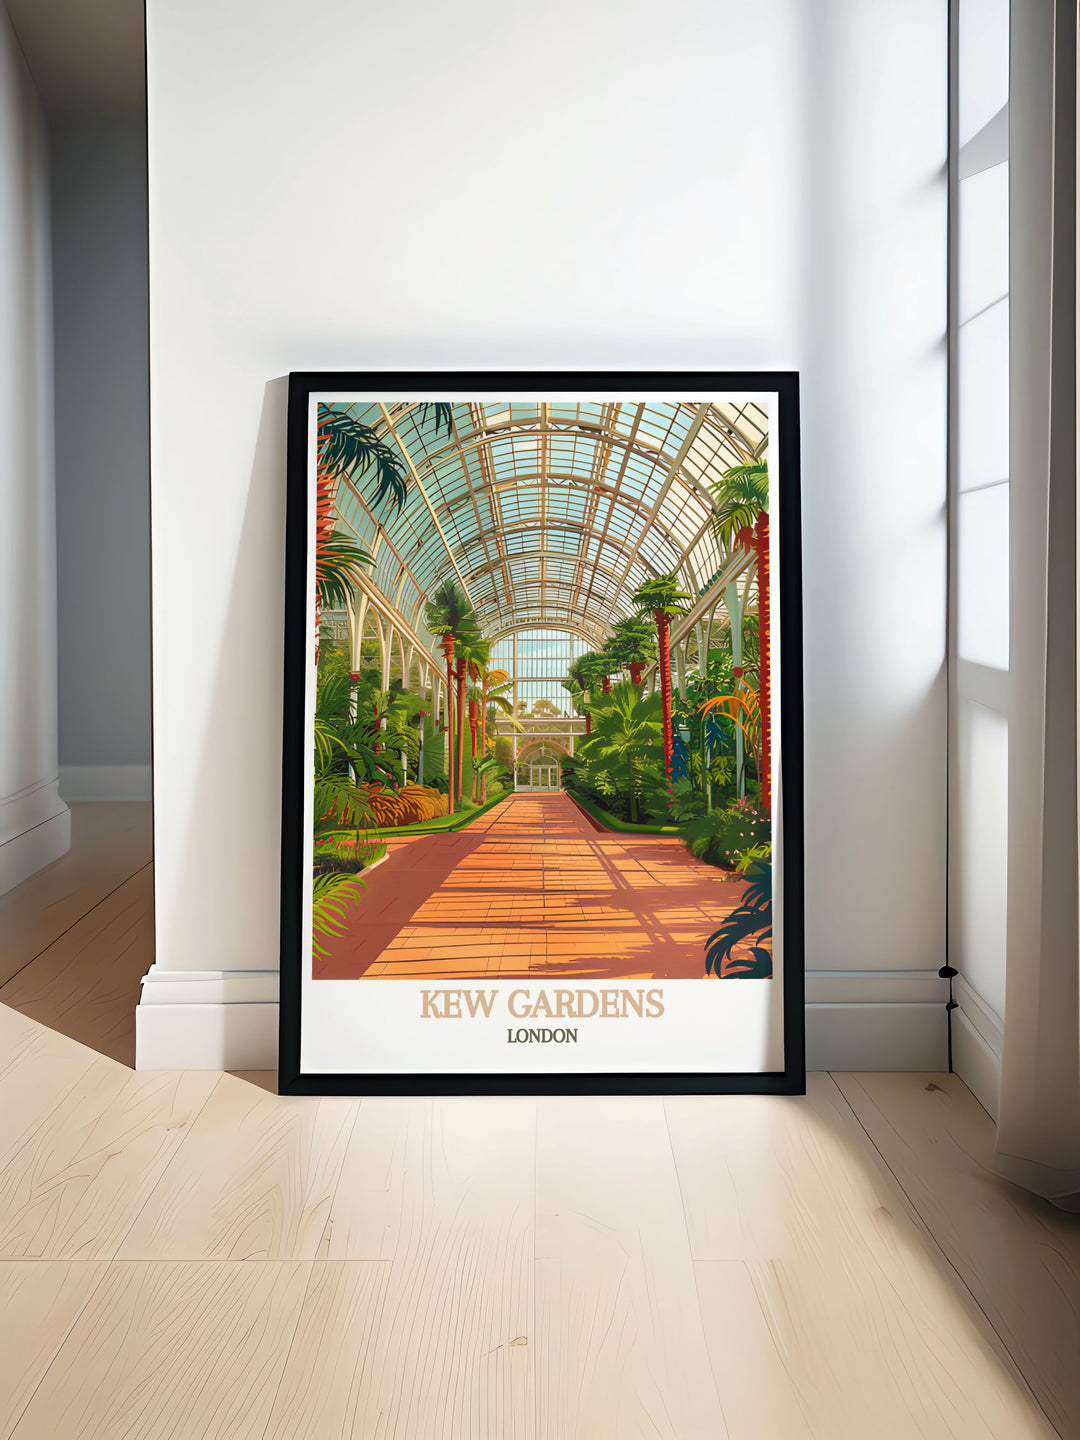 Capturing the grandeur of the Temperate House, this travel poster brings the stunning Victorian architecture and diverse plant collections of Kew Gardens into your home decor. Perfect for horticulture enthusiasts and lovers of elegant architecture.